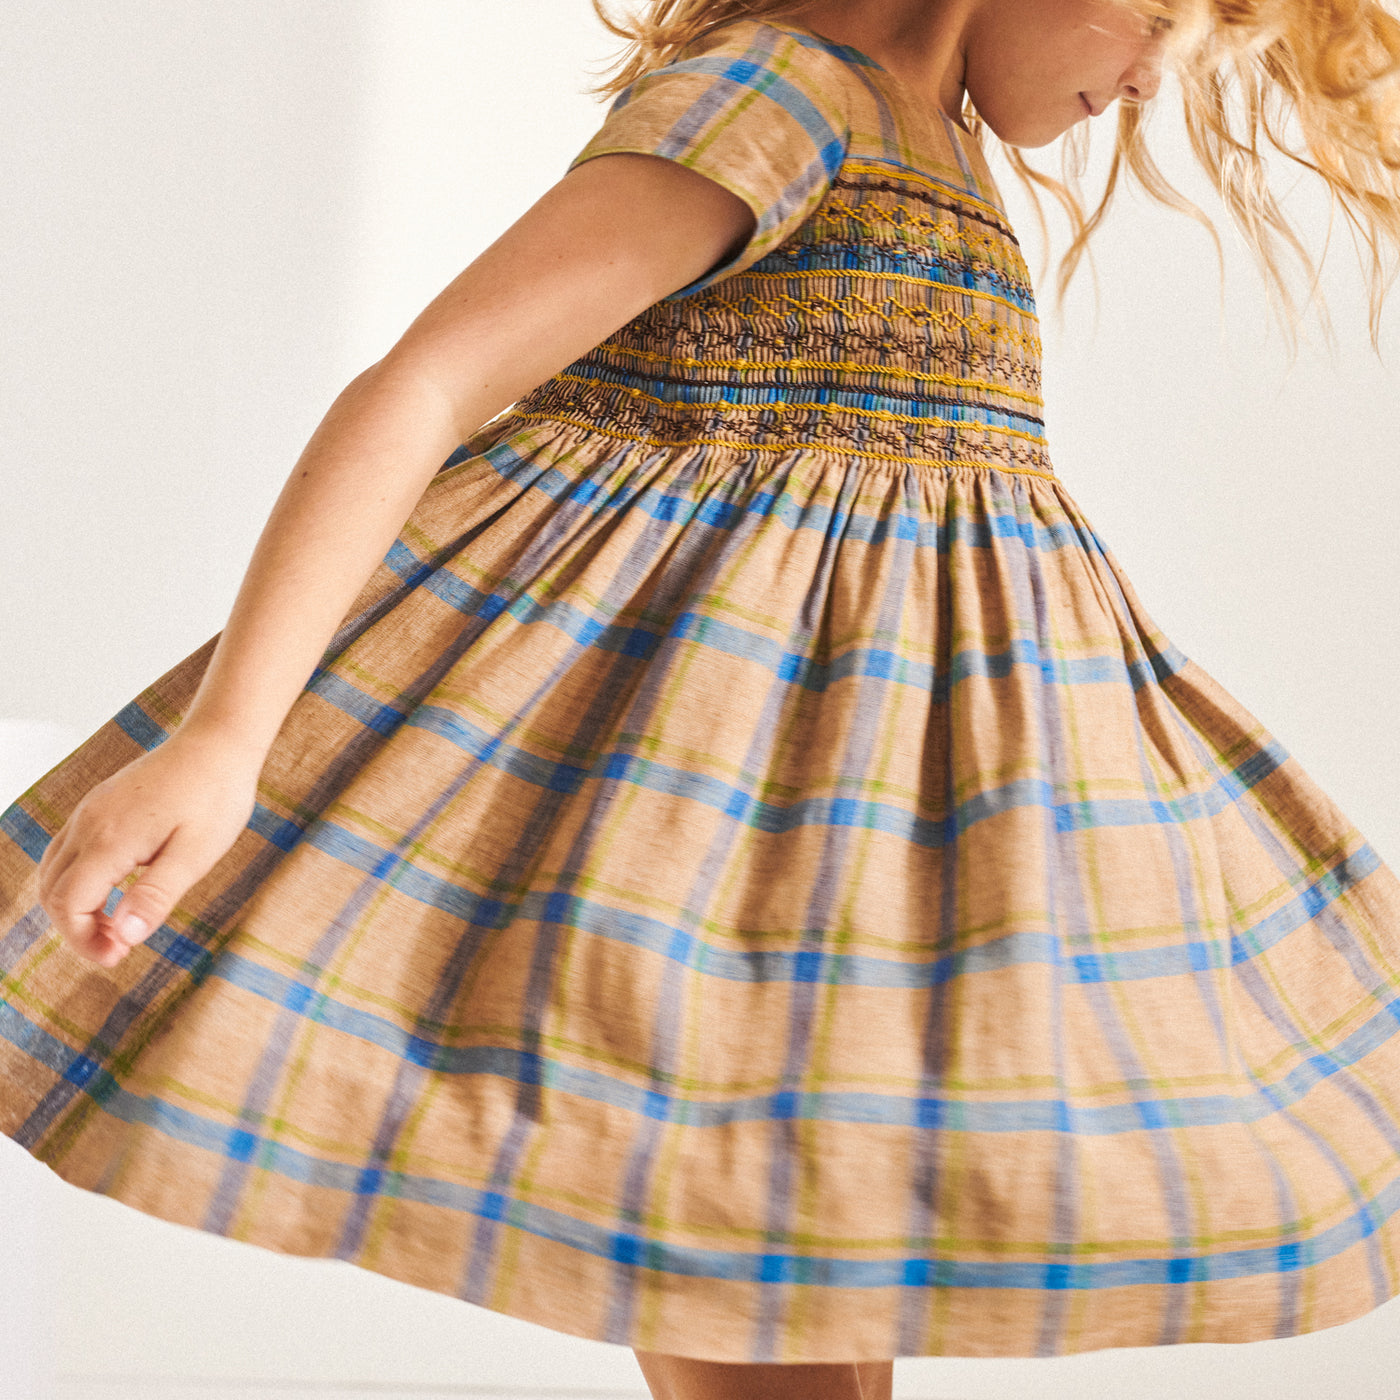 Bonpoint young girl twirling in plaid orange and blue dress